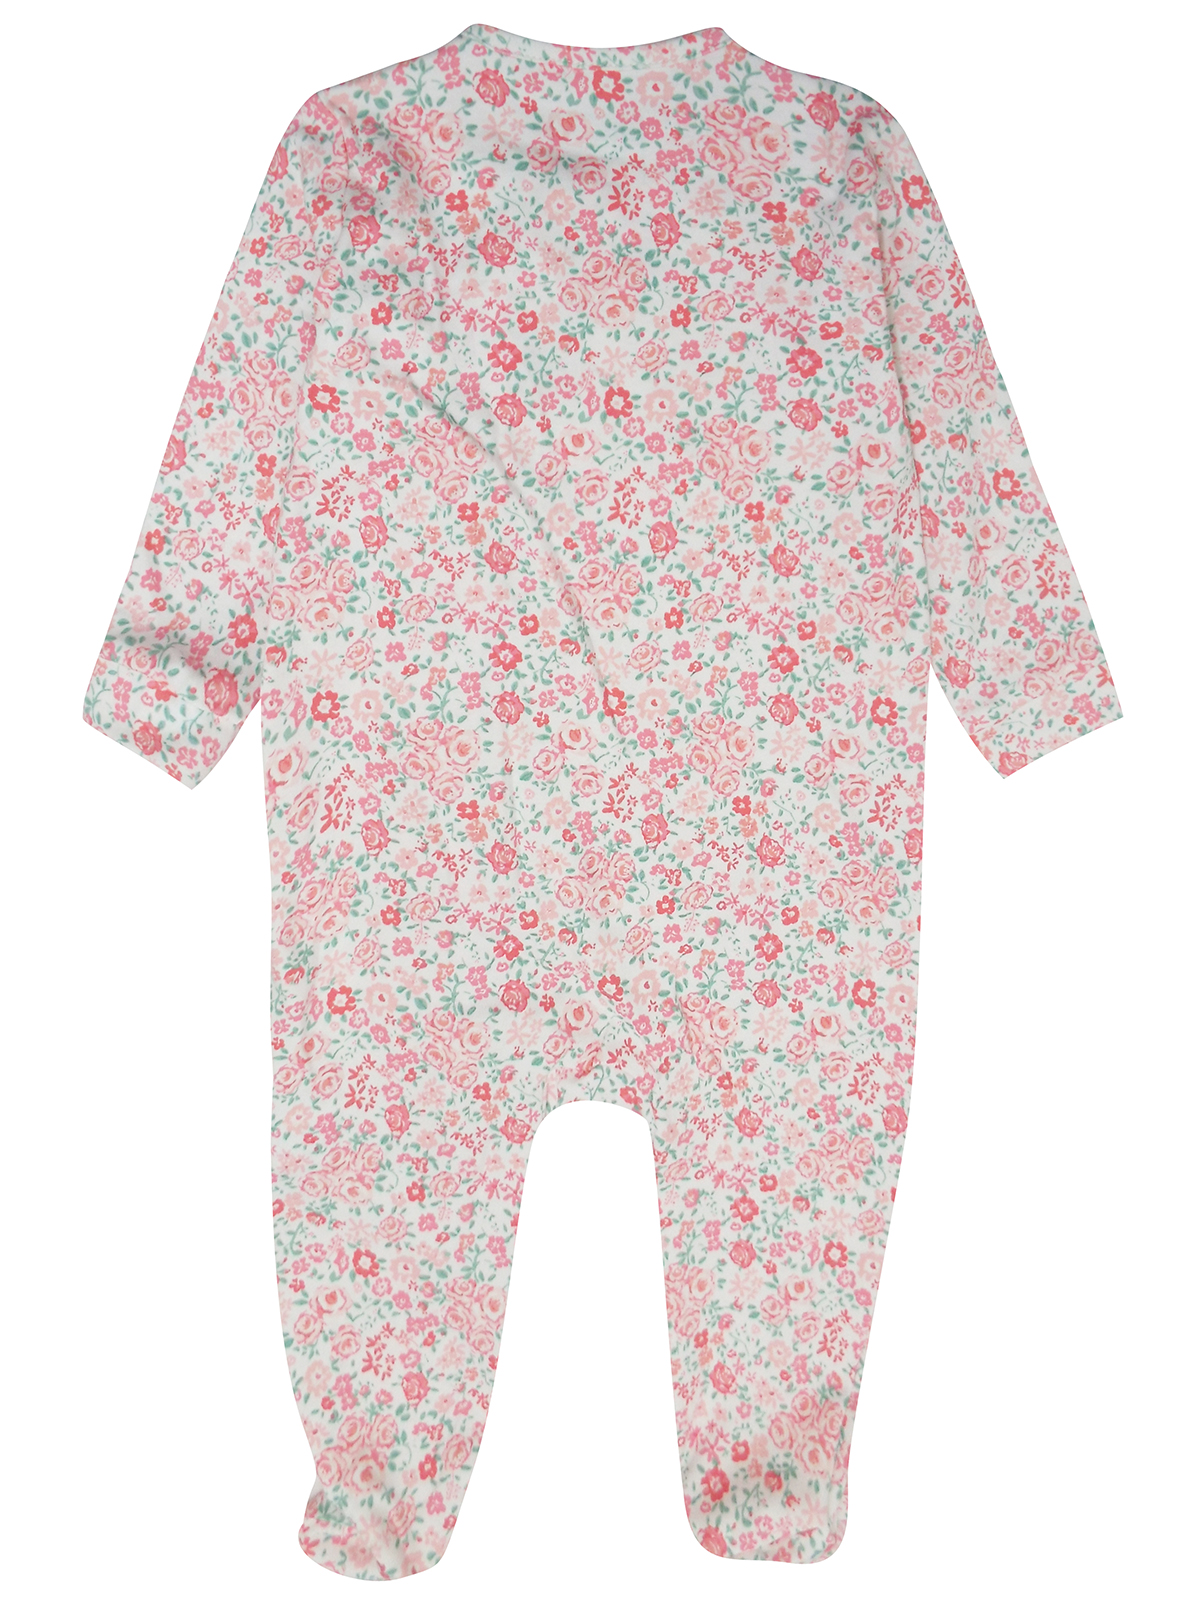 N3XT PINK Baby Girls Floral Print Frill Trim Sleepsuit - Size 6/9M to 9/12M